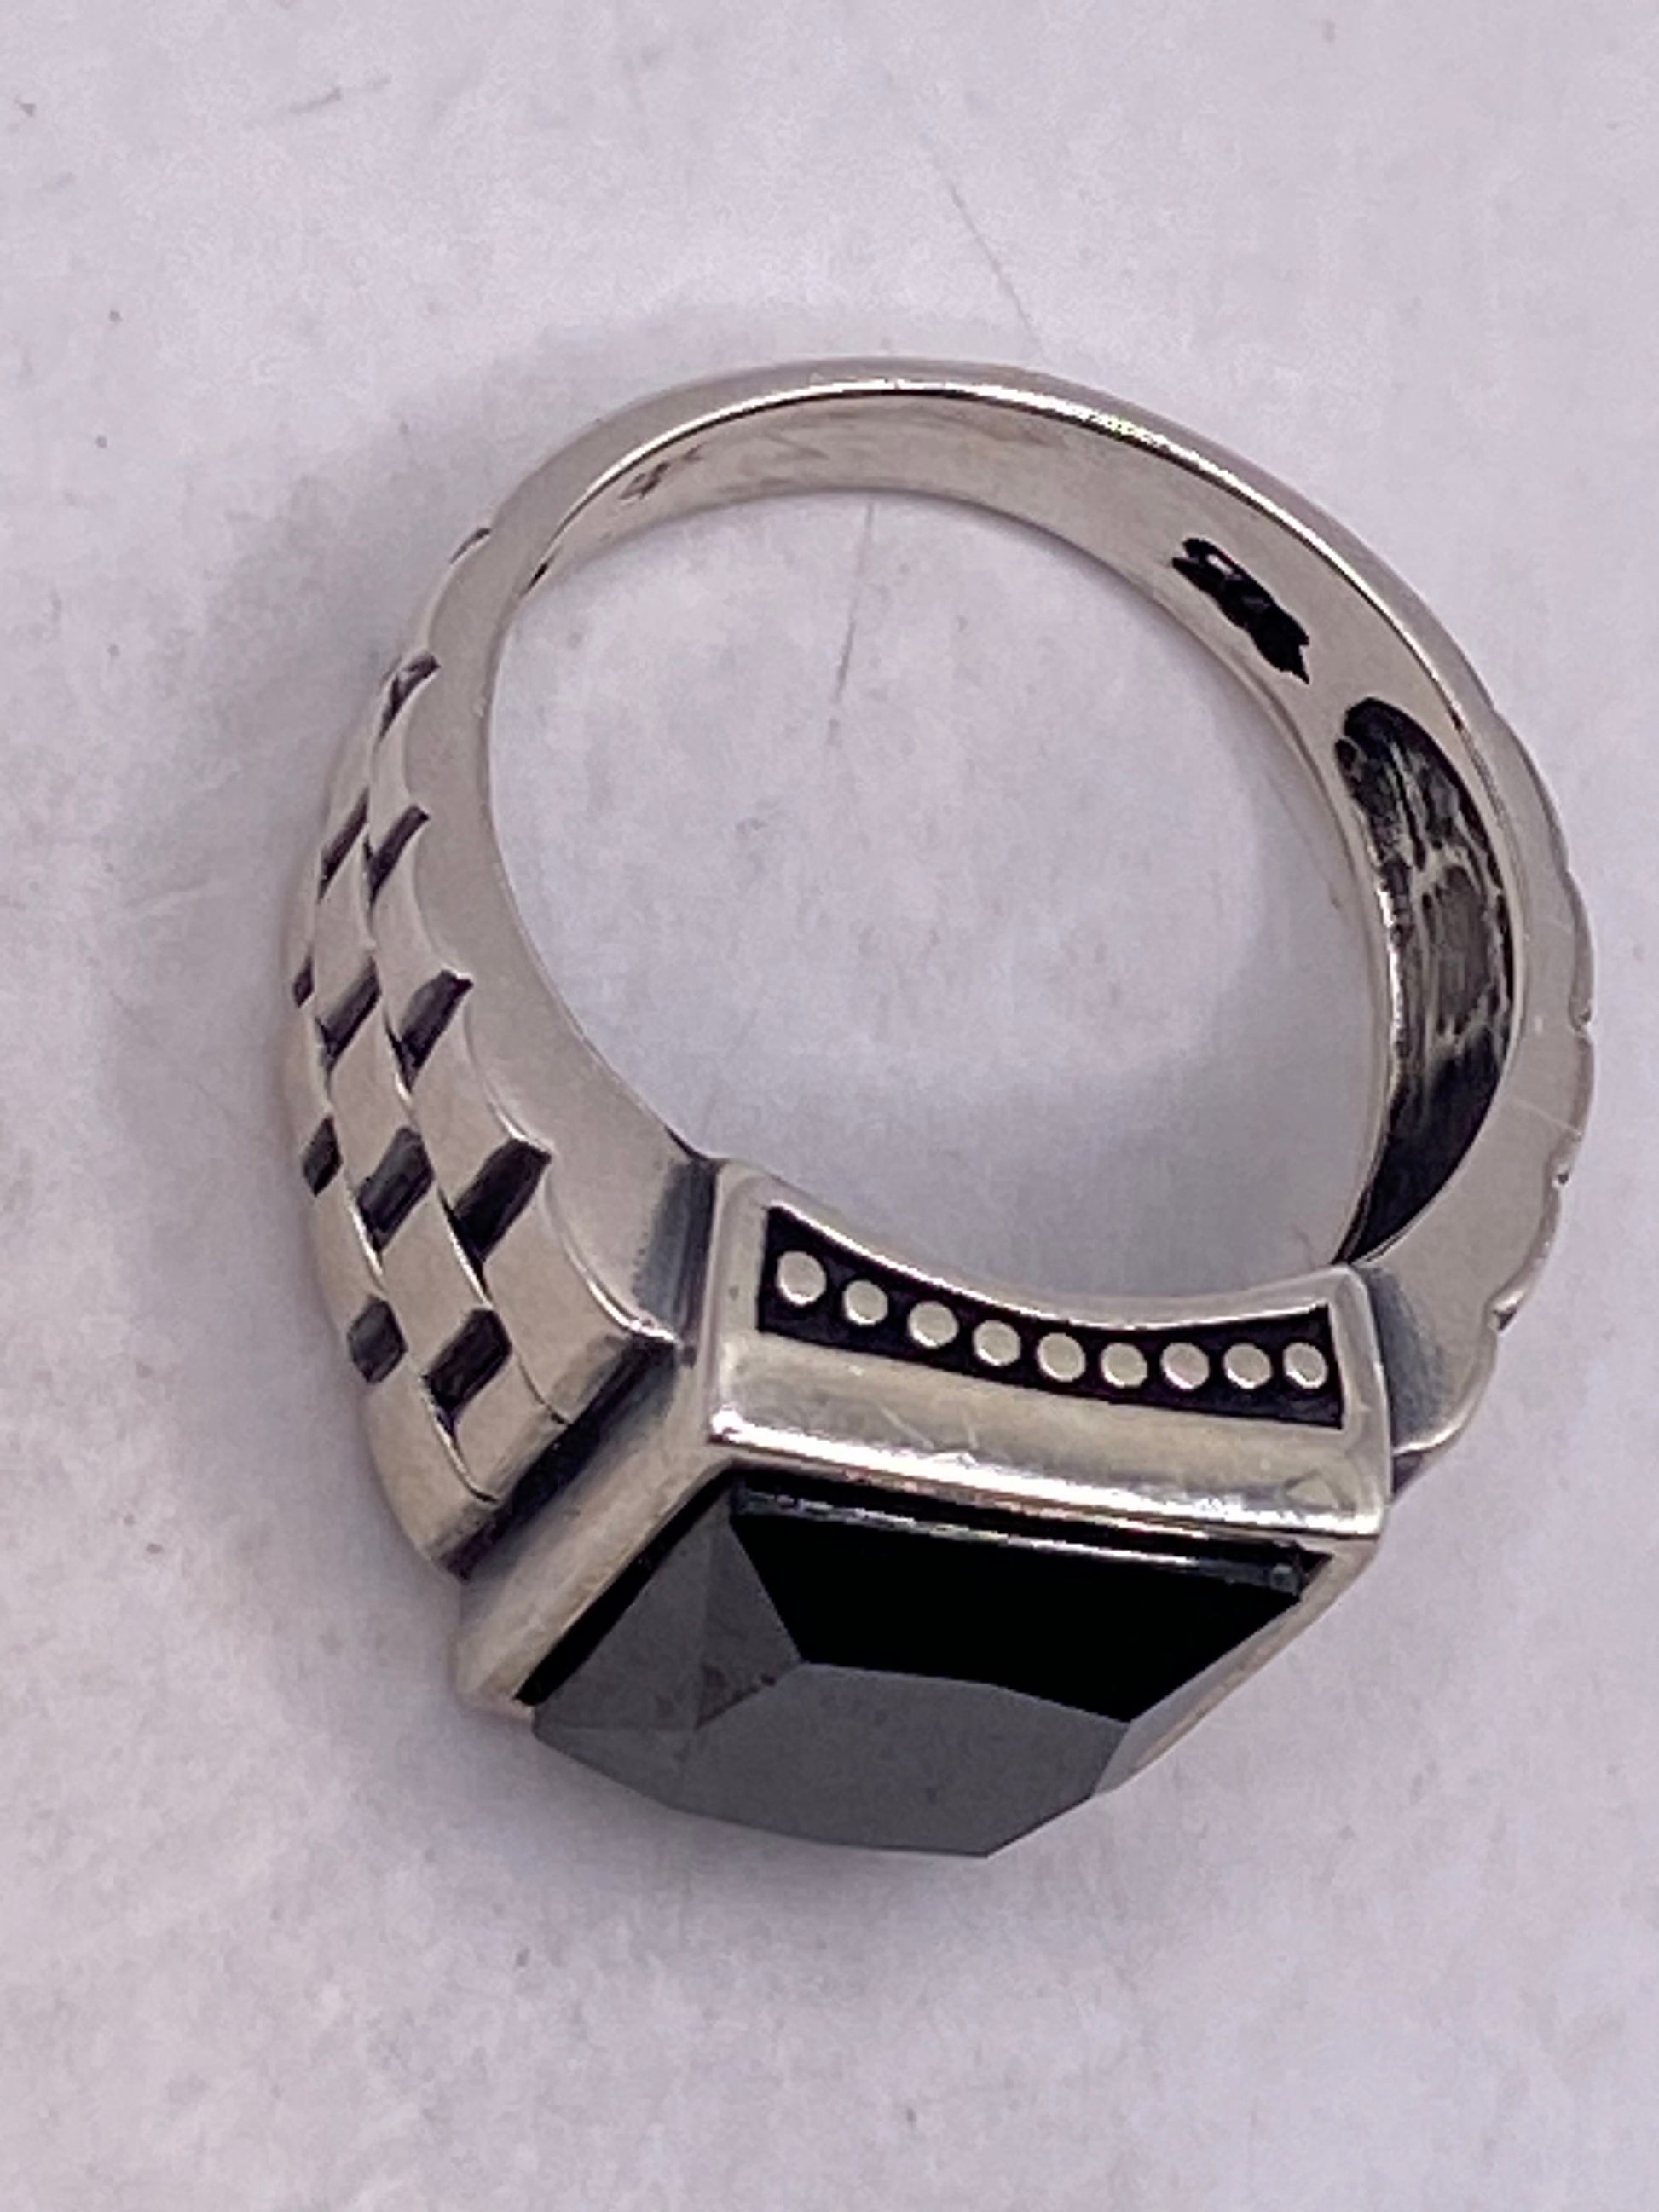 Vintage Hematite Mens Ring in 925 Sterling Silver Persian Styled with Genuine Faceted Hematite